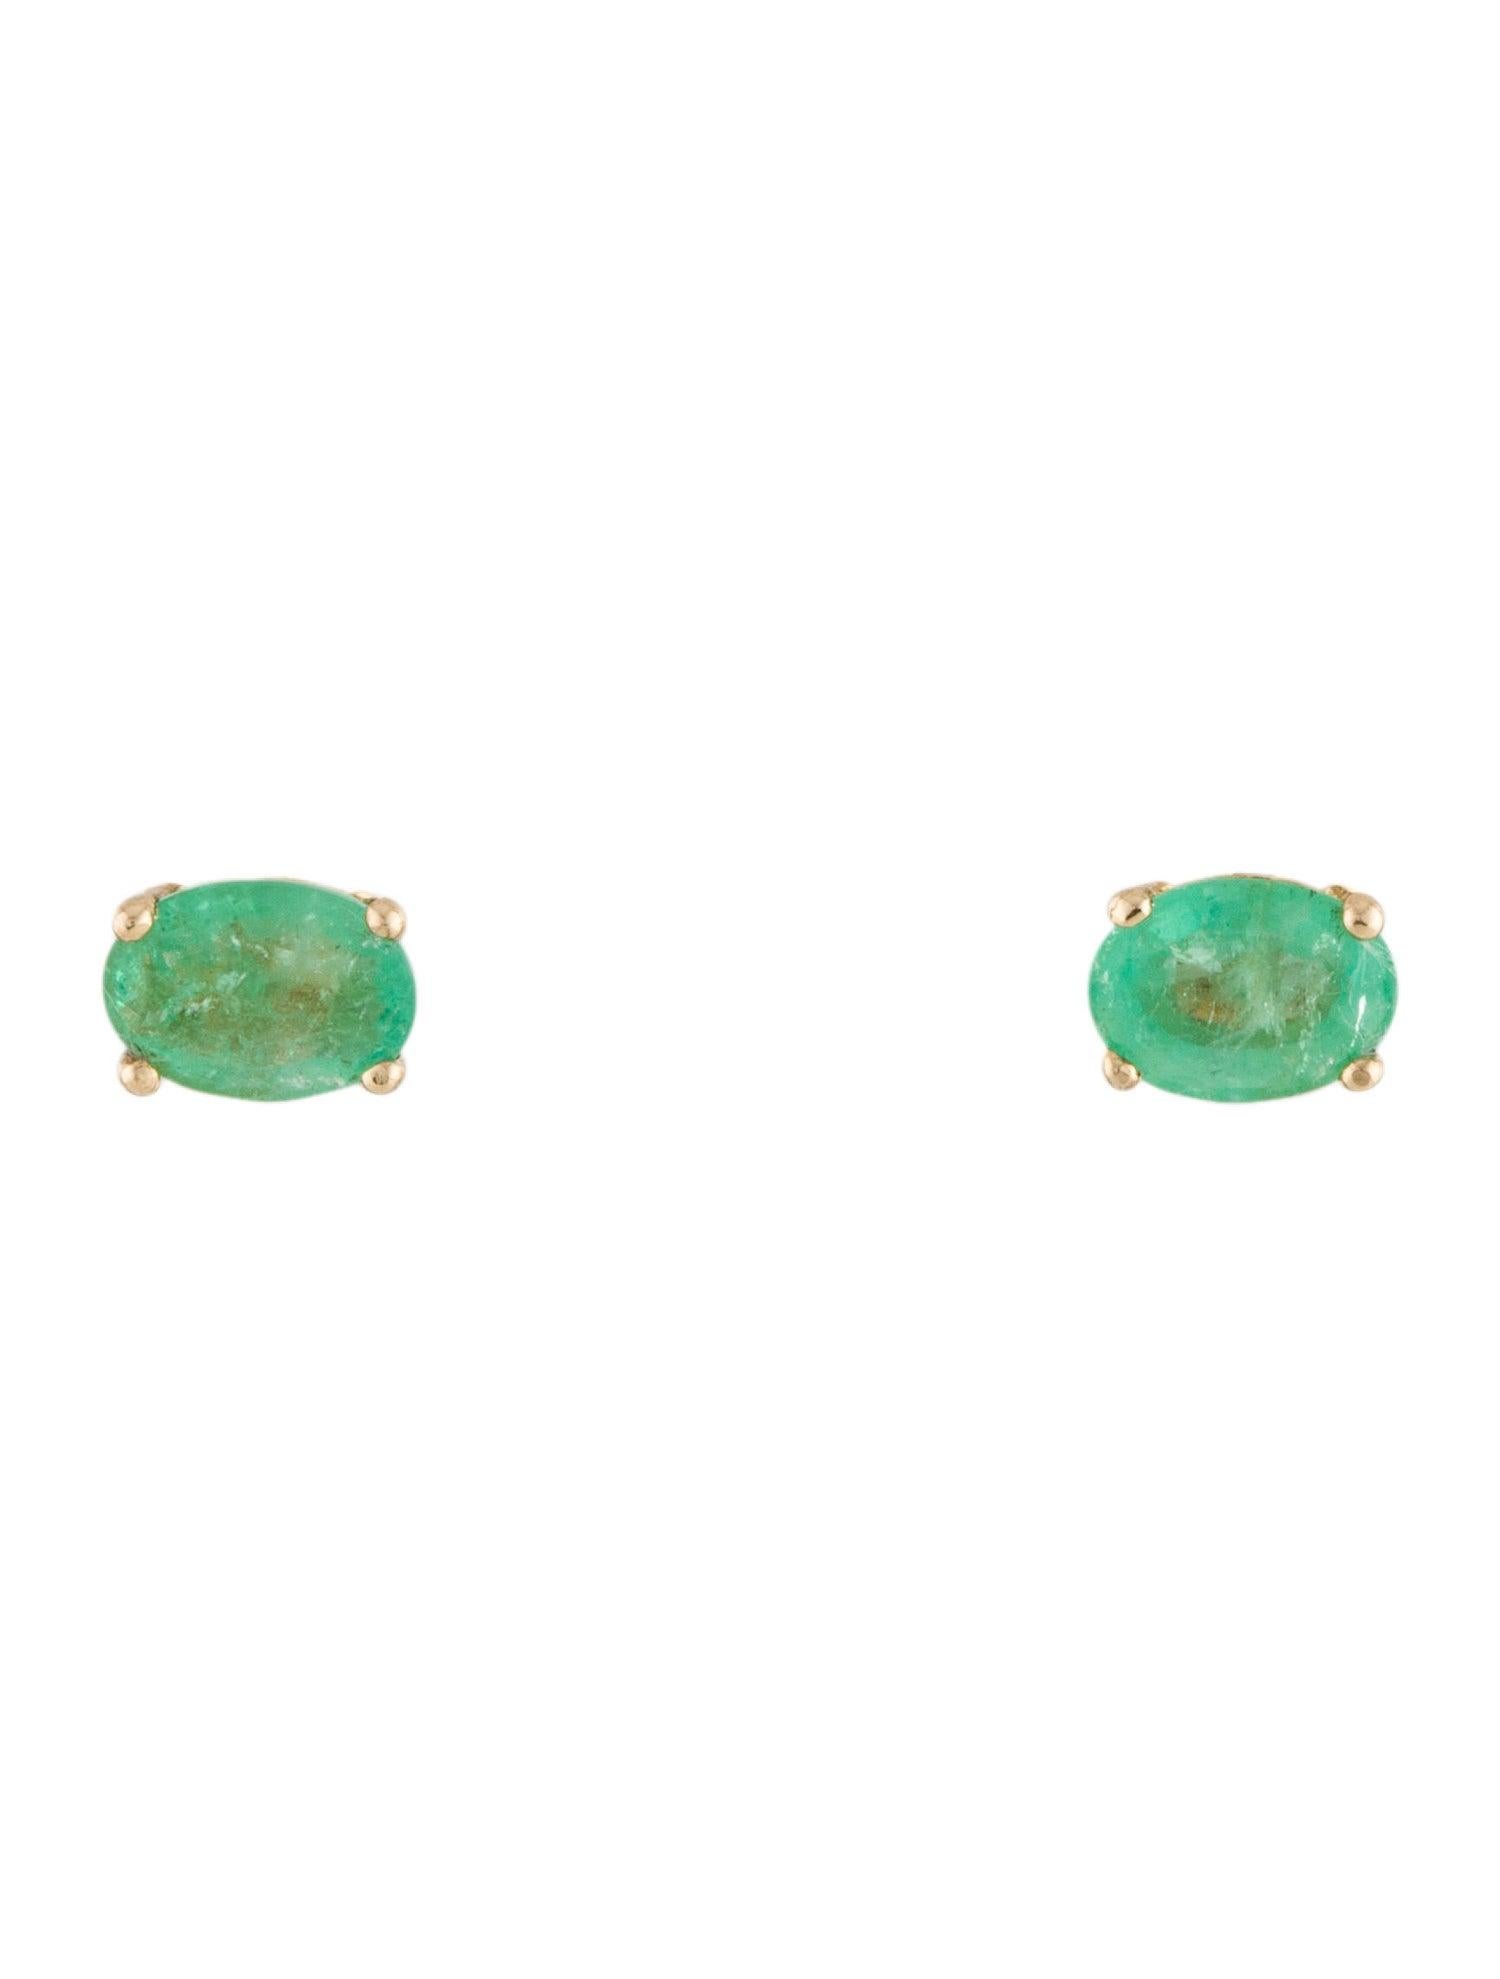 Elegant 14K Emerald Stud Earrings - Classic Gemstone Jewelry In New Condition For Sale In Holtsville, NY